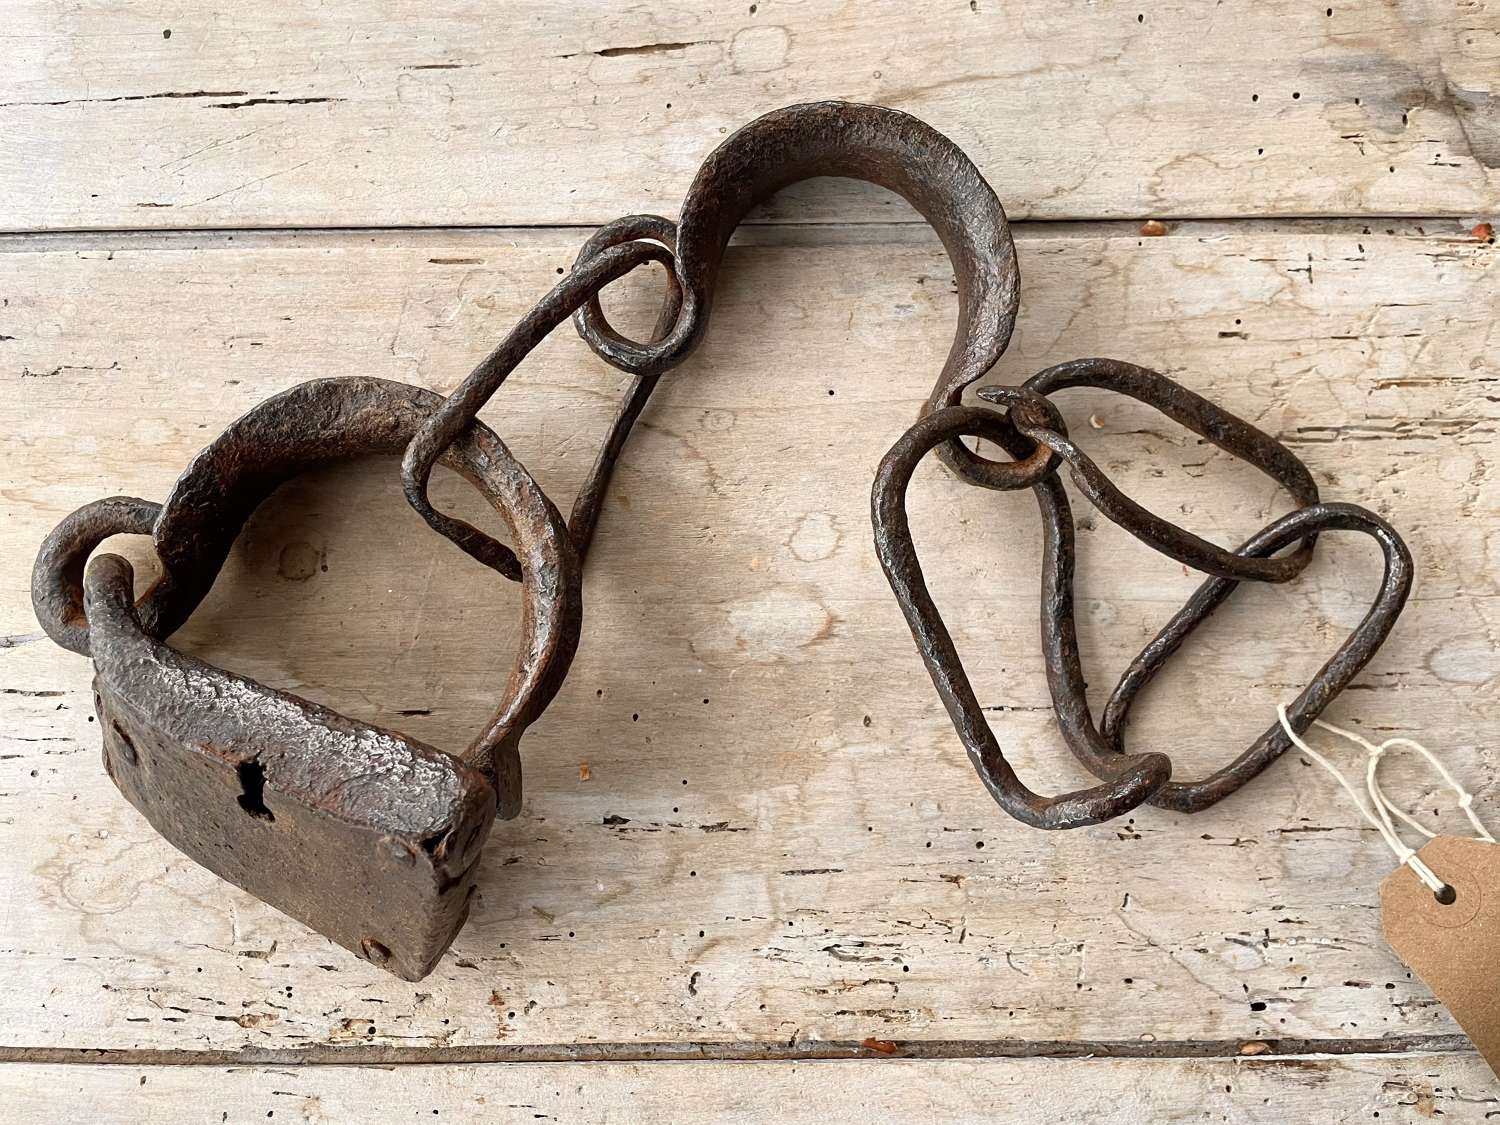 19th Cent Animal Leg Shackles with LOCK